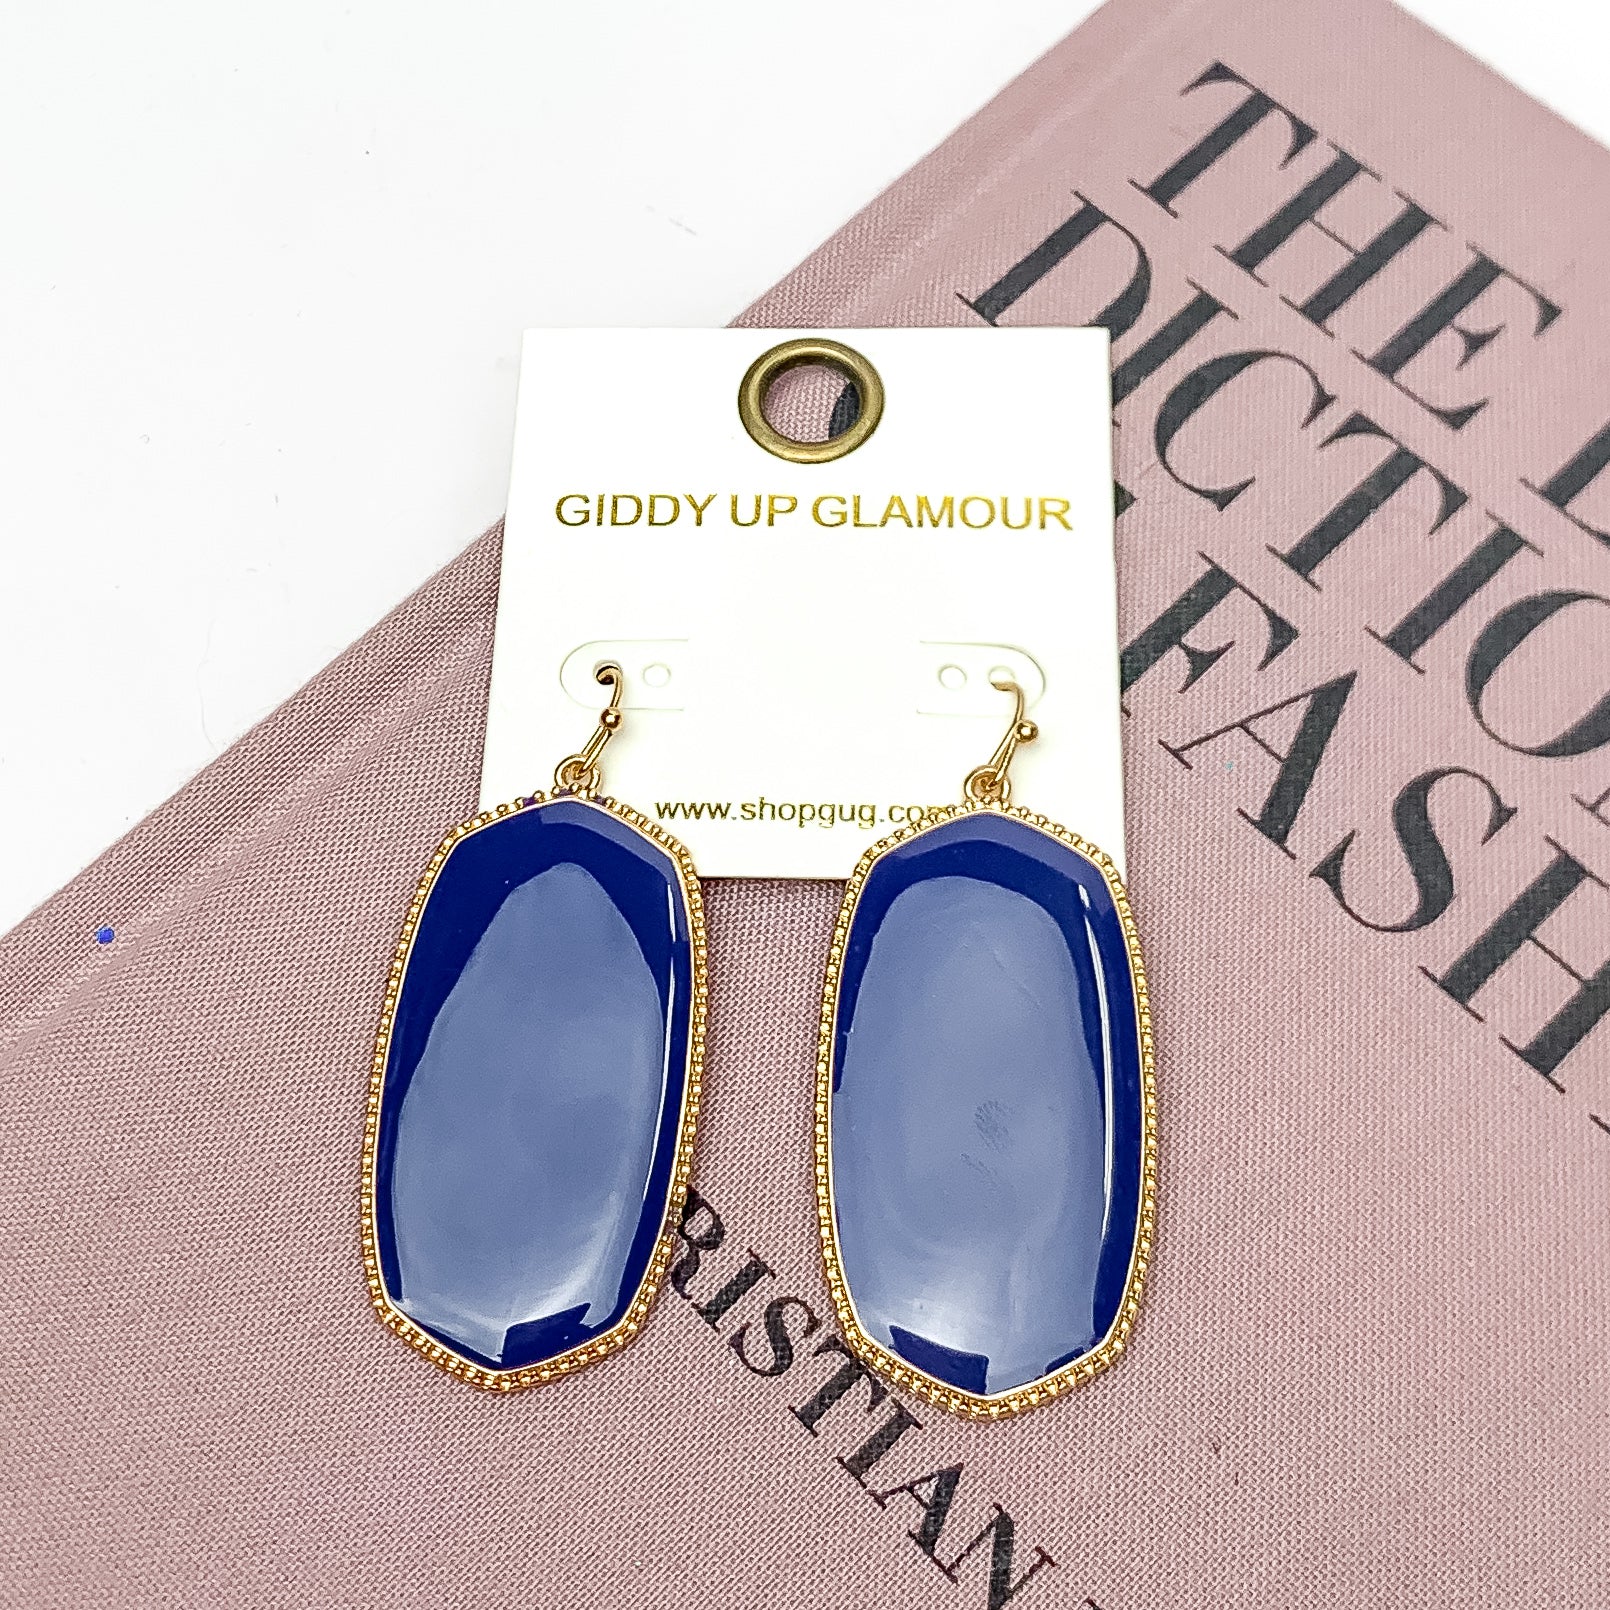 Southern Charm Oval Earrings in Navy Blue. These earrings are laying on a pink book with a white background behind the book.